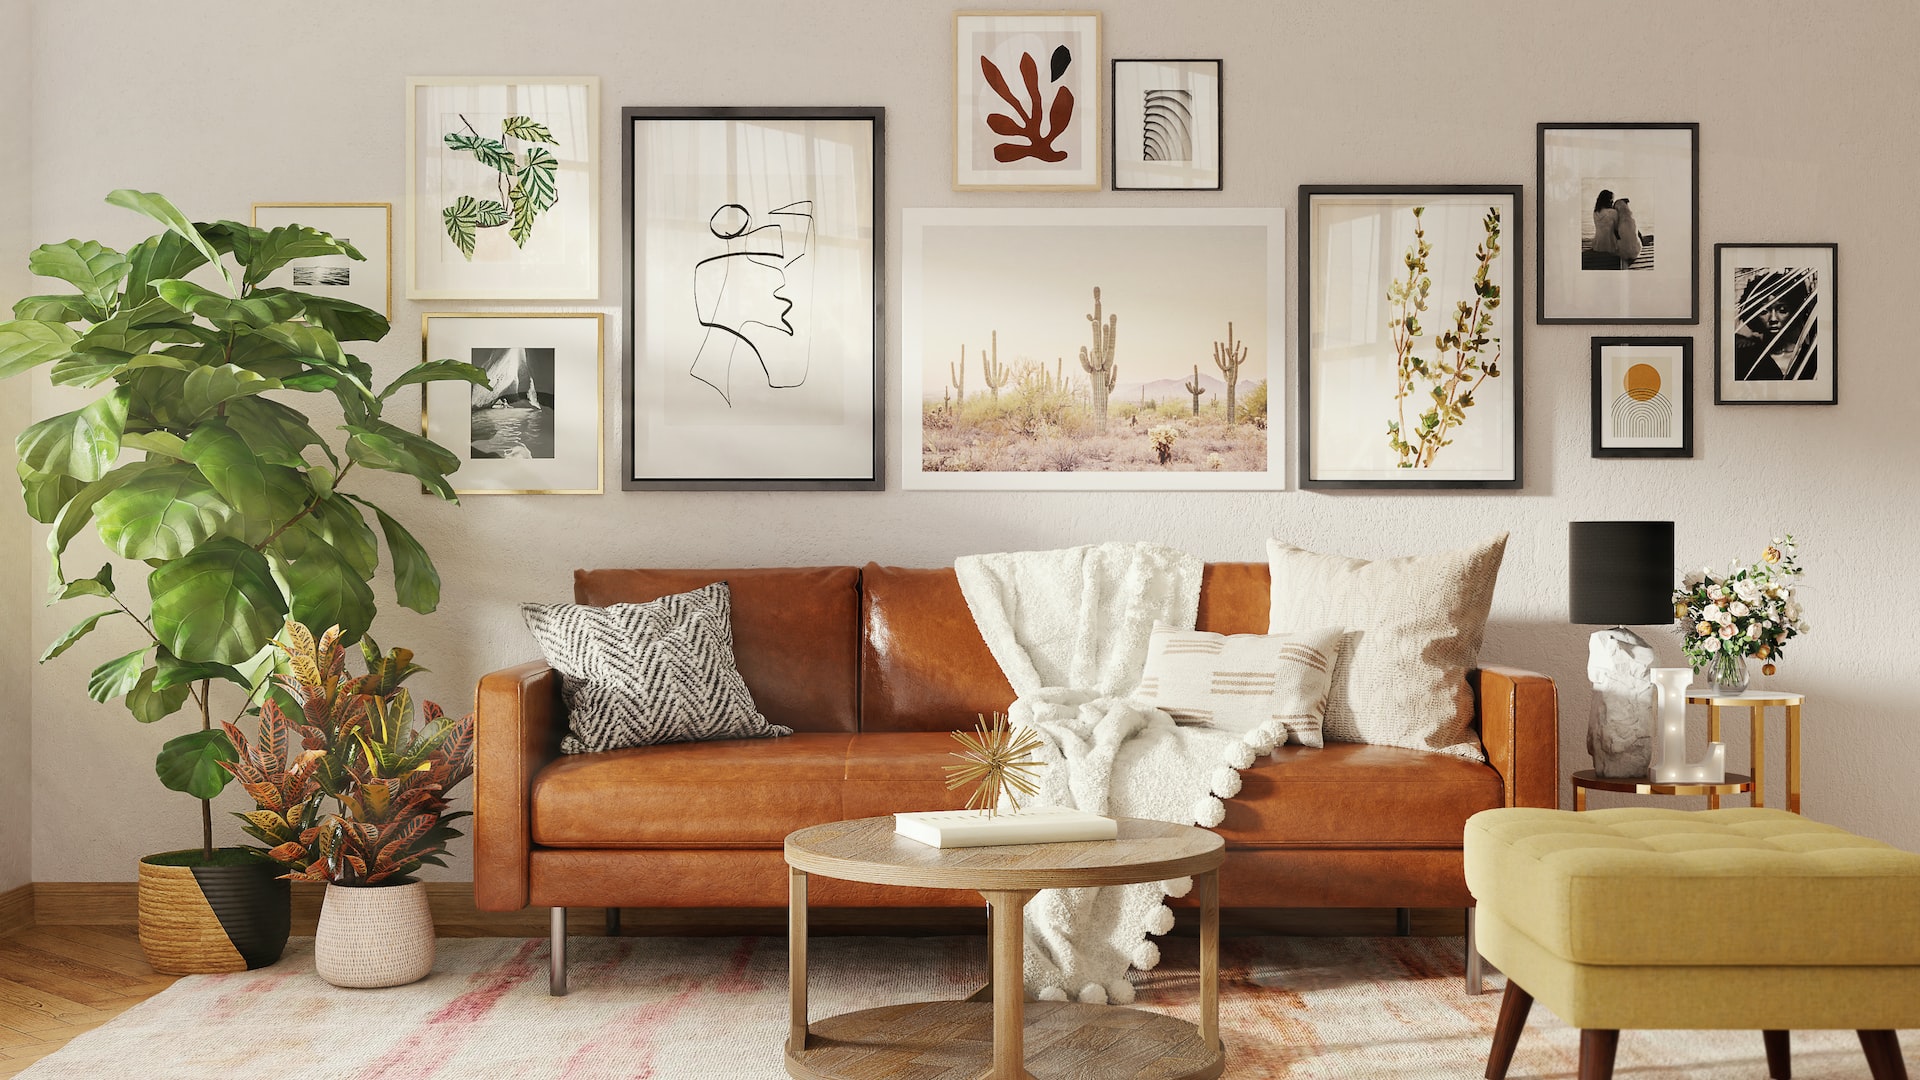 10 Quick Ways to Refresh Your Living Room Look